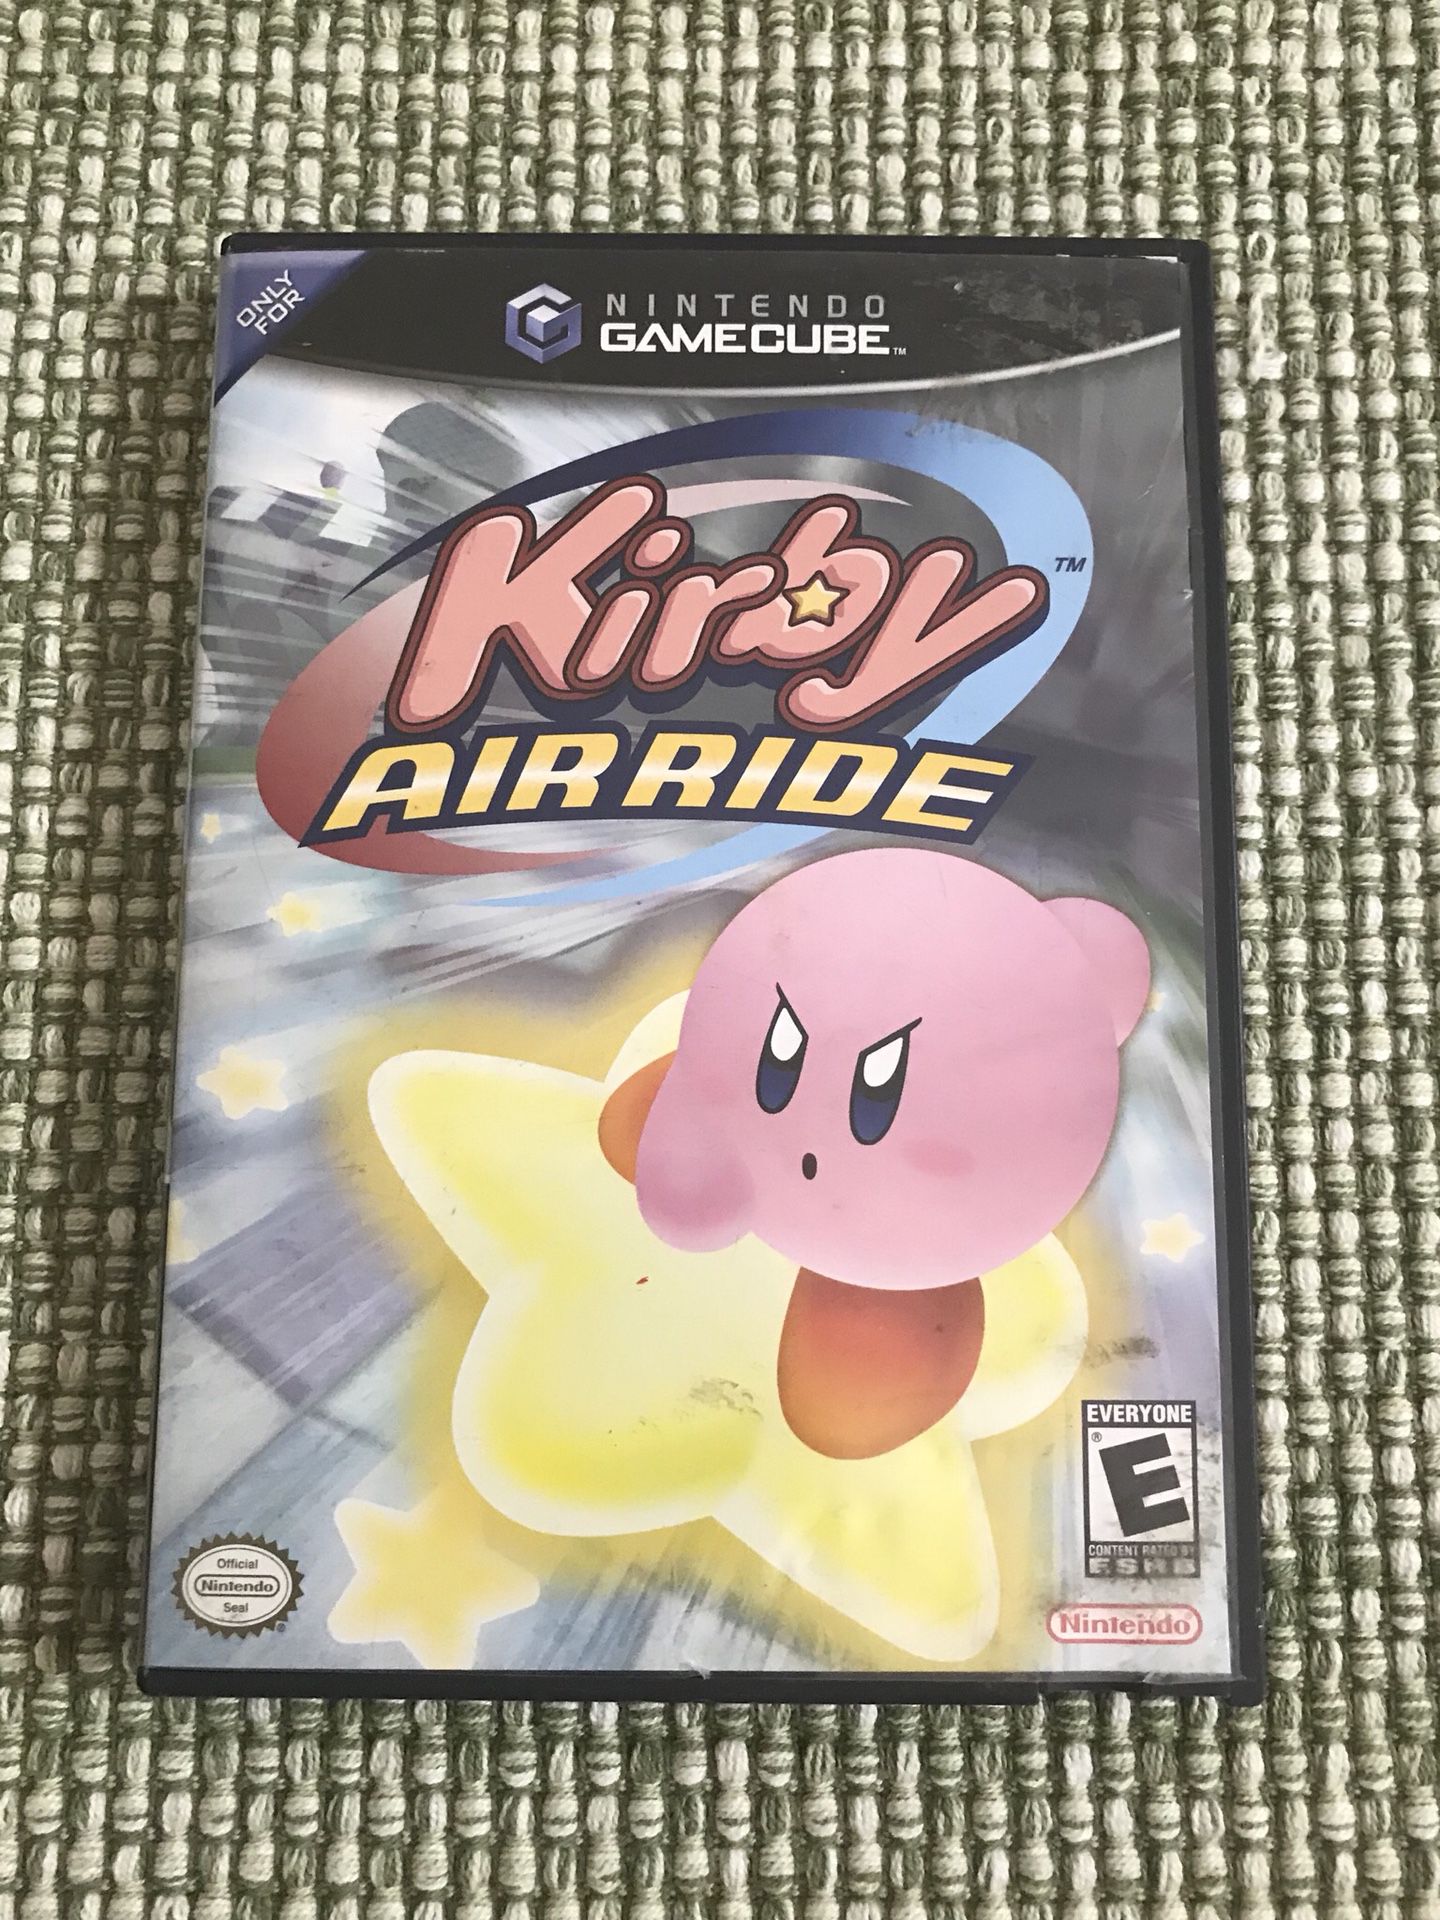 Kirby Air Ride - Nintendo GameCube for Sale in Summerville, SC - OfferUp